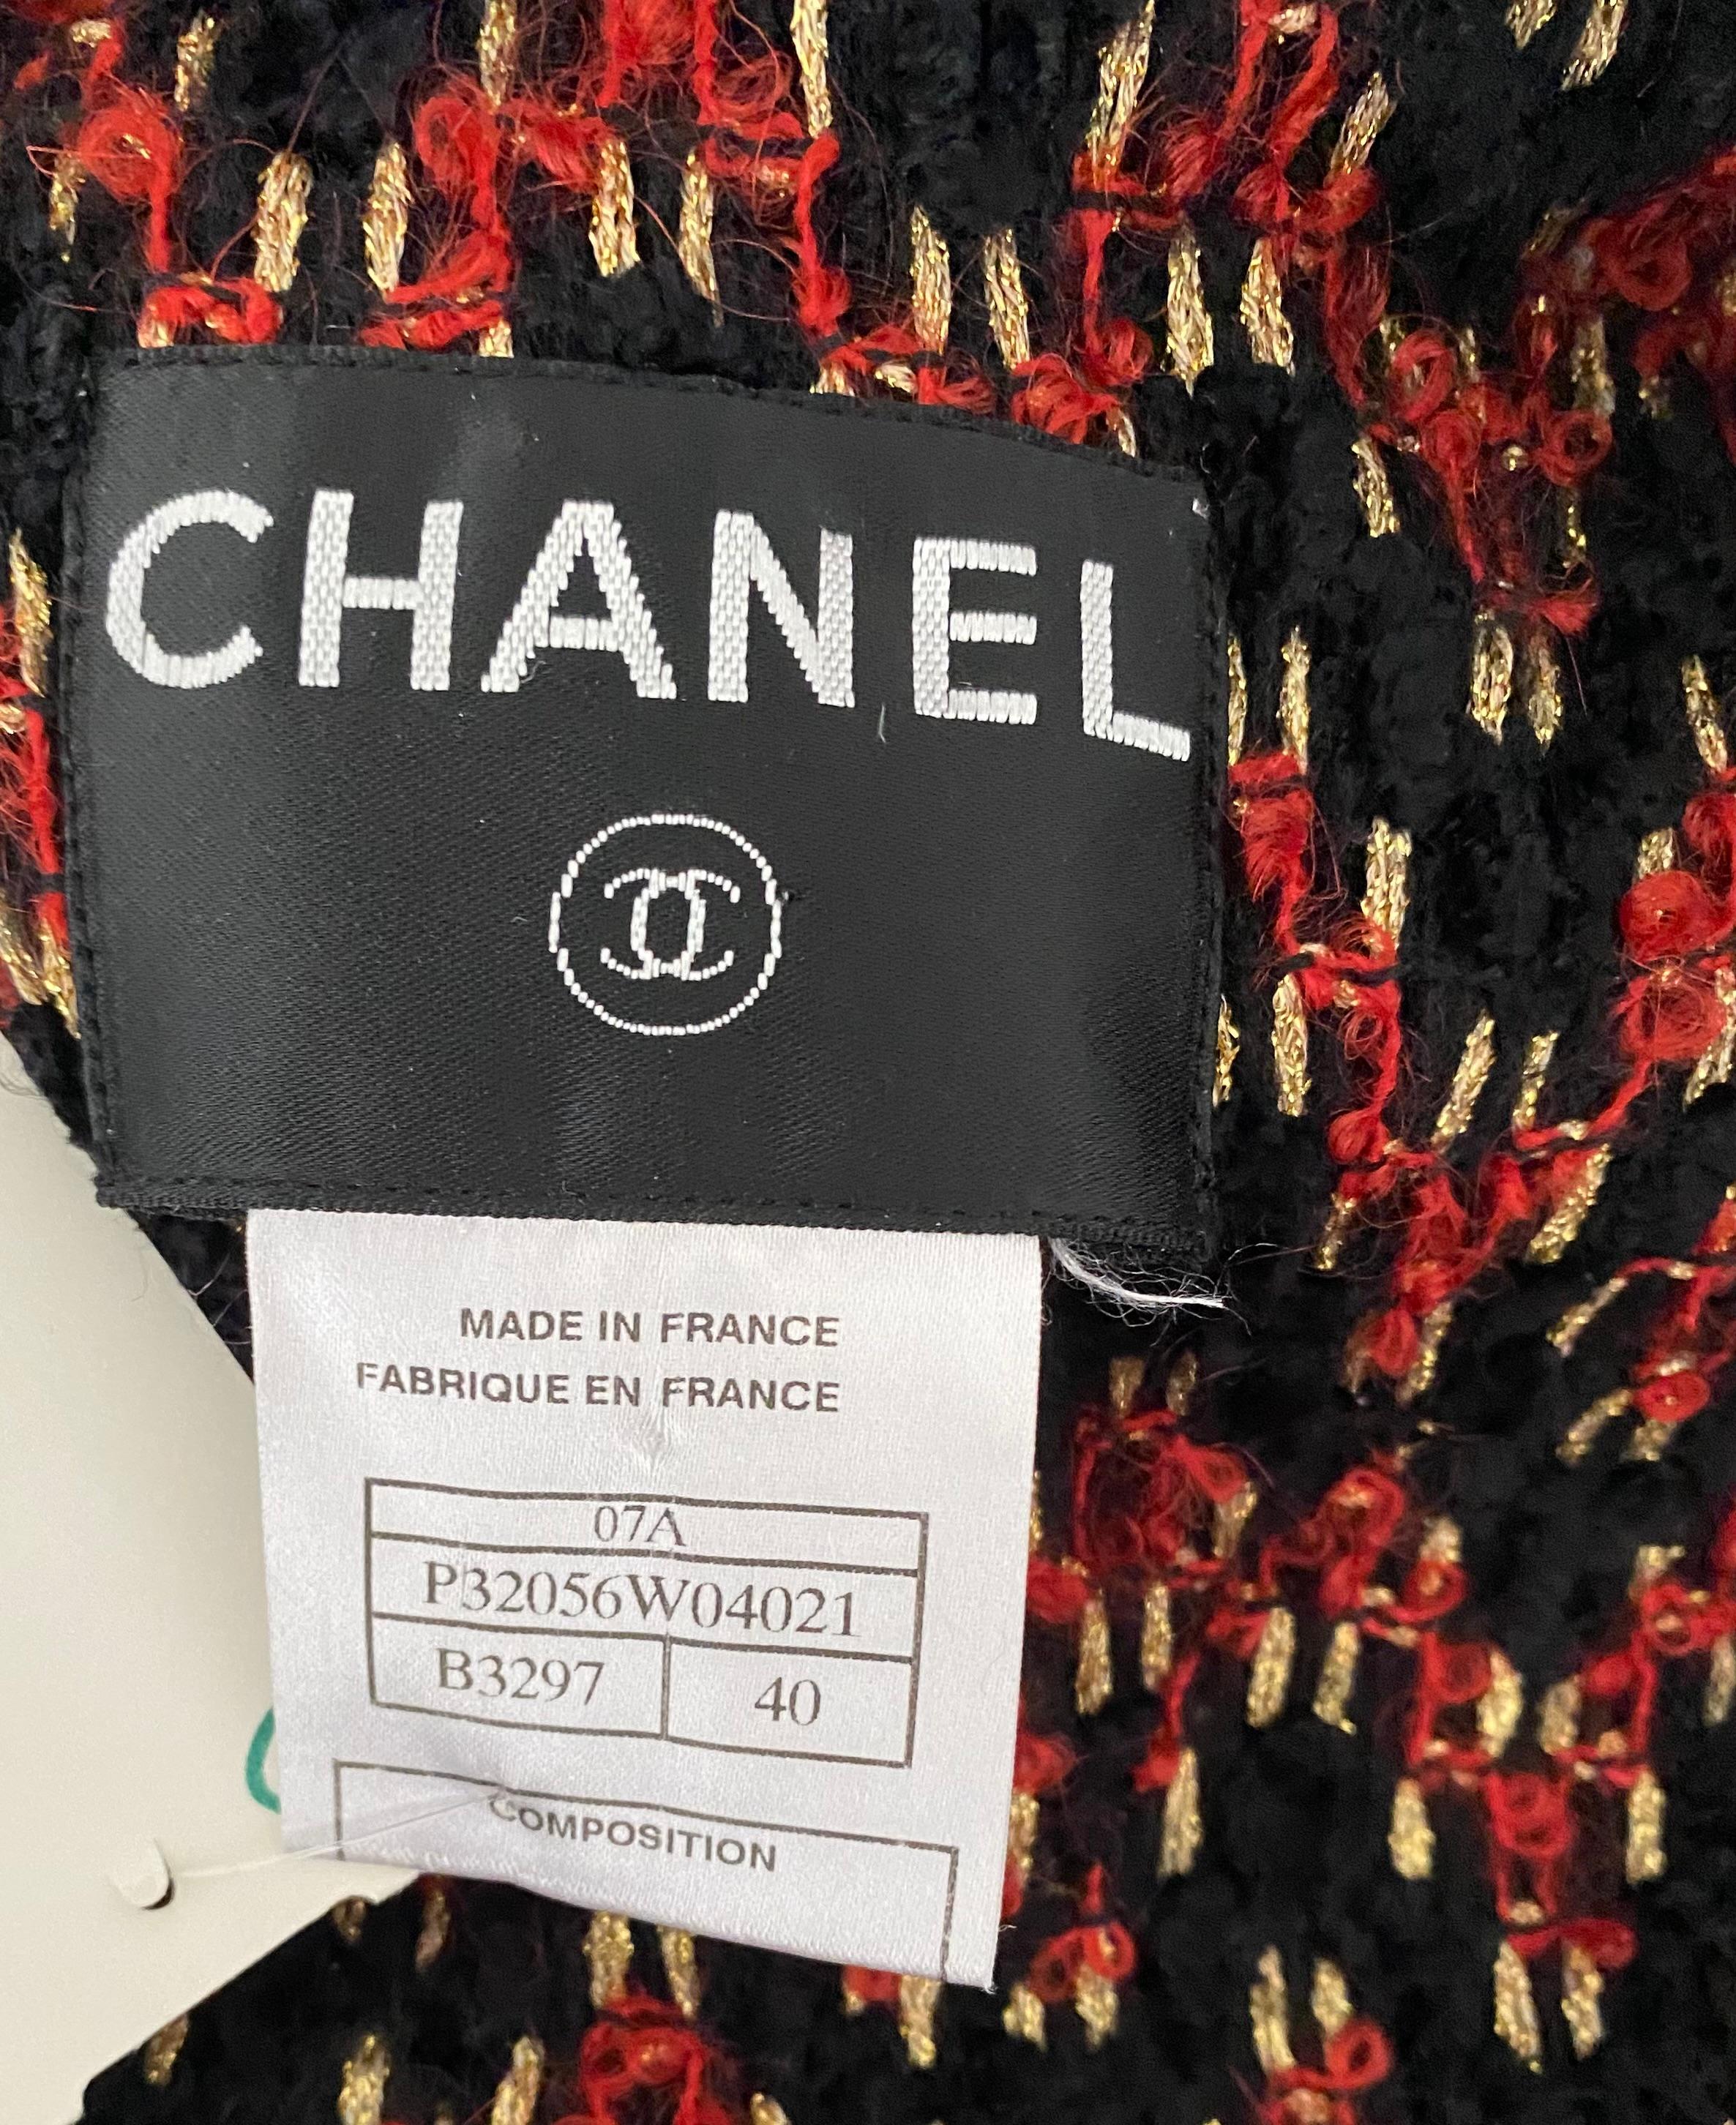 Chanel Runway Fall 2007 Black/Red Wool and Cashmere Jacket - Size 40 For Sale 5